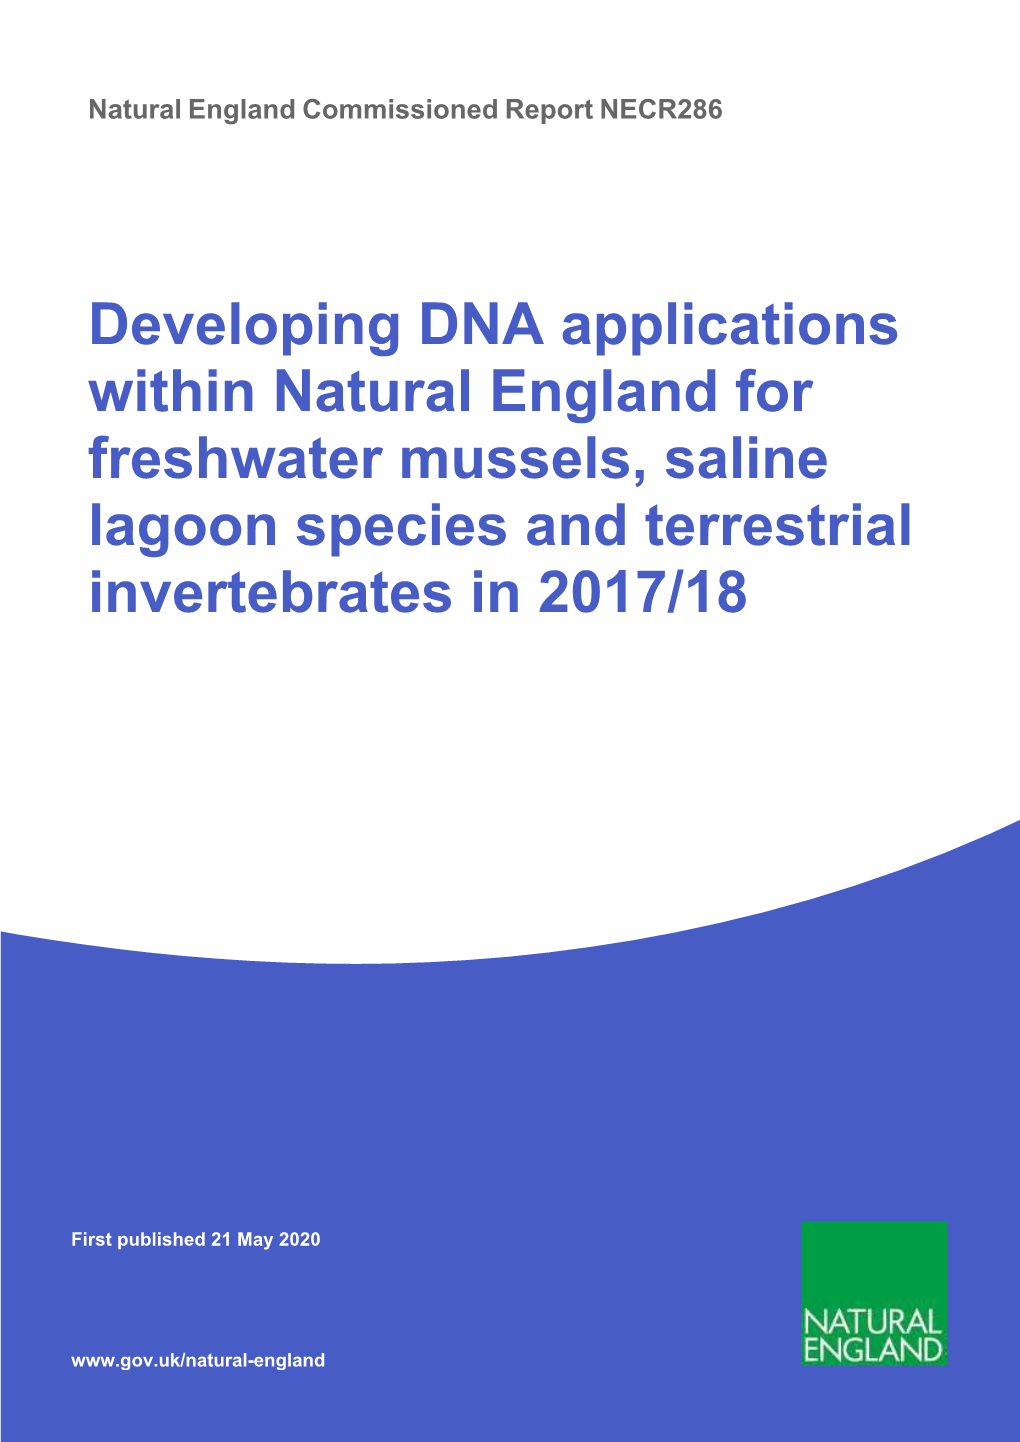 Developing DNA Applications Within Natural England for Freshwater Mussels, Saline Lagoon Species and Terrestrial Invertebrates in 2017/18